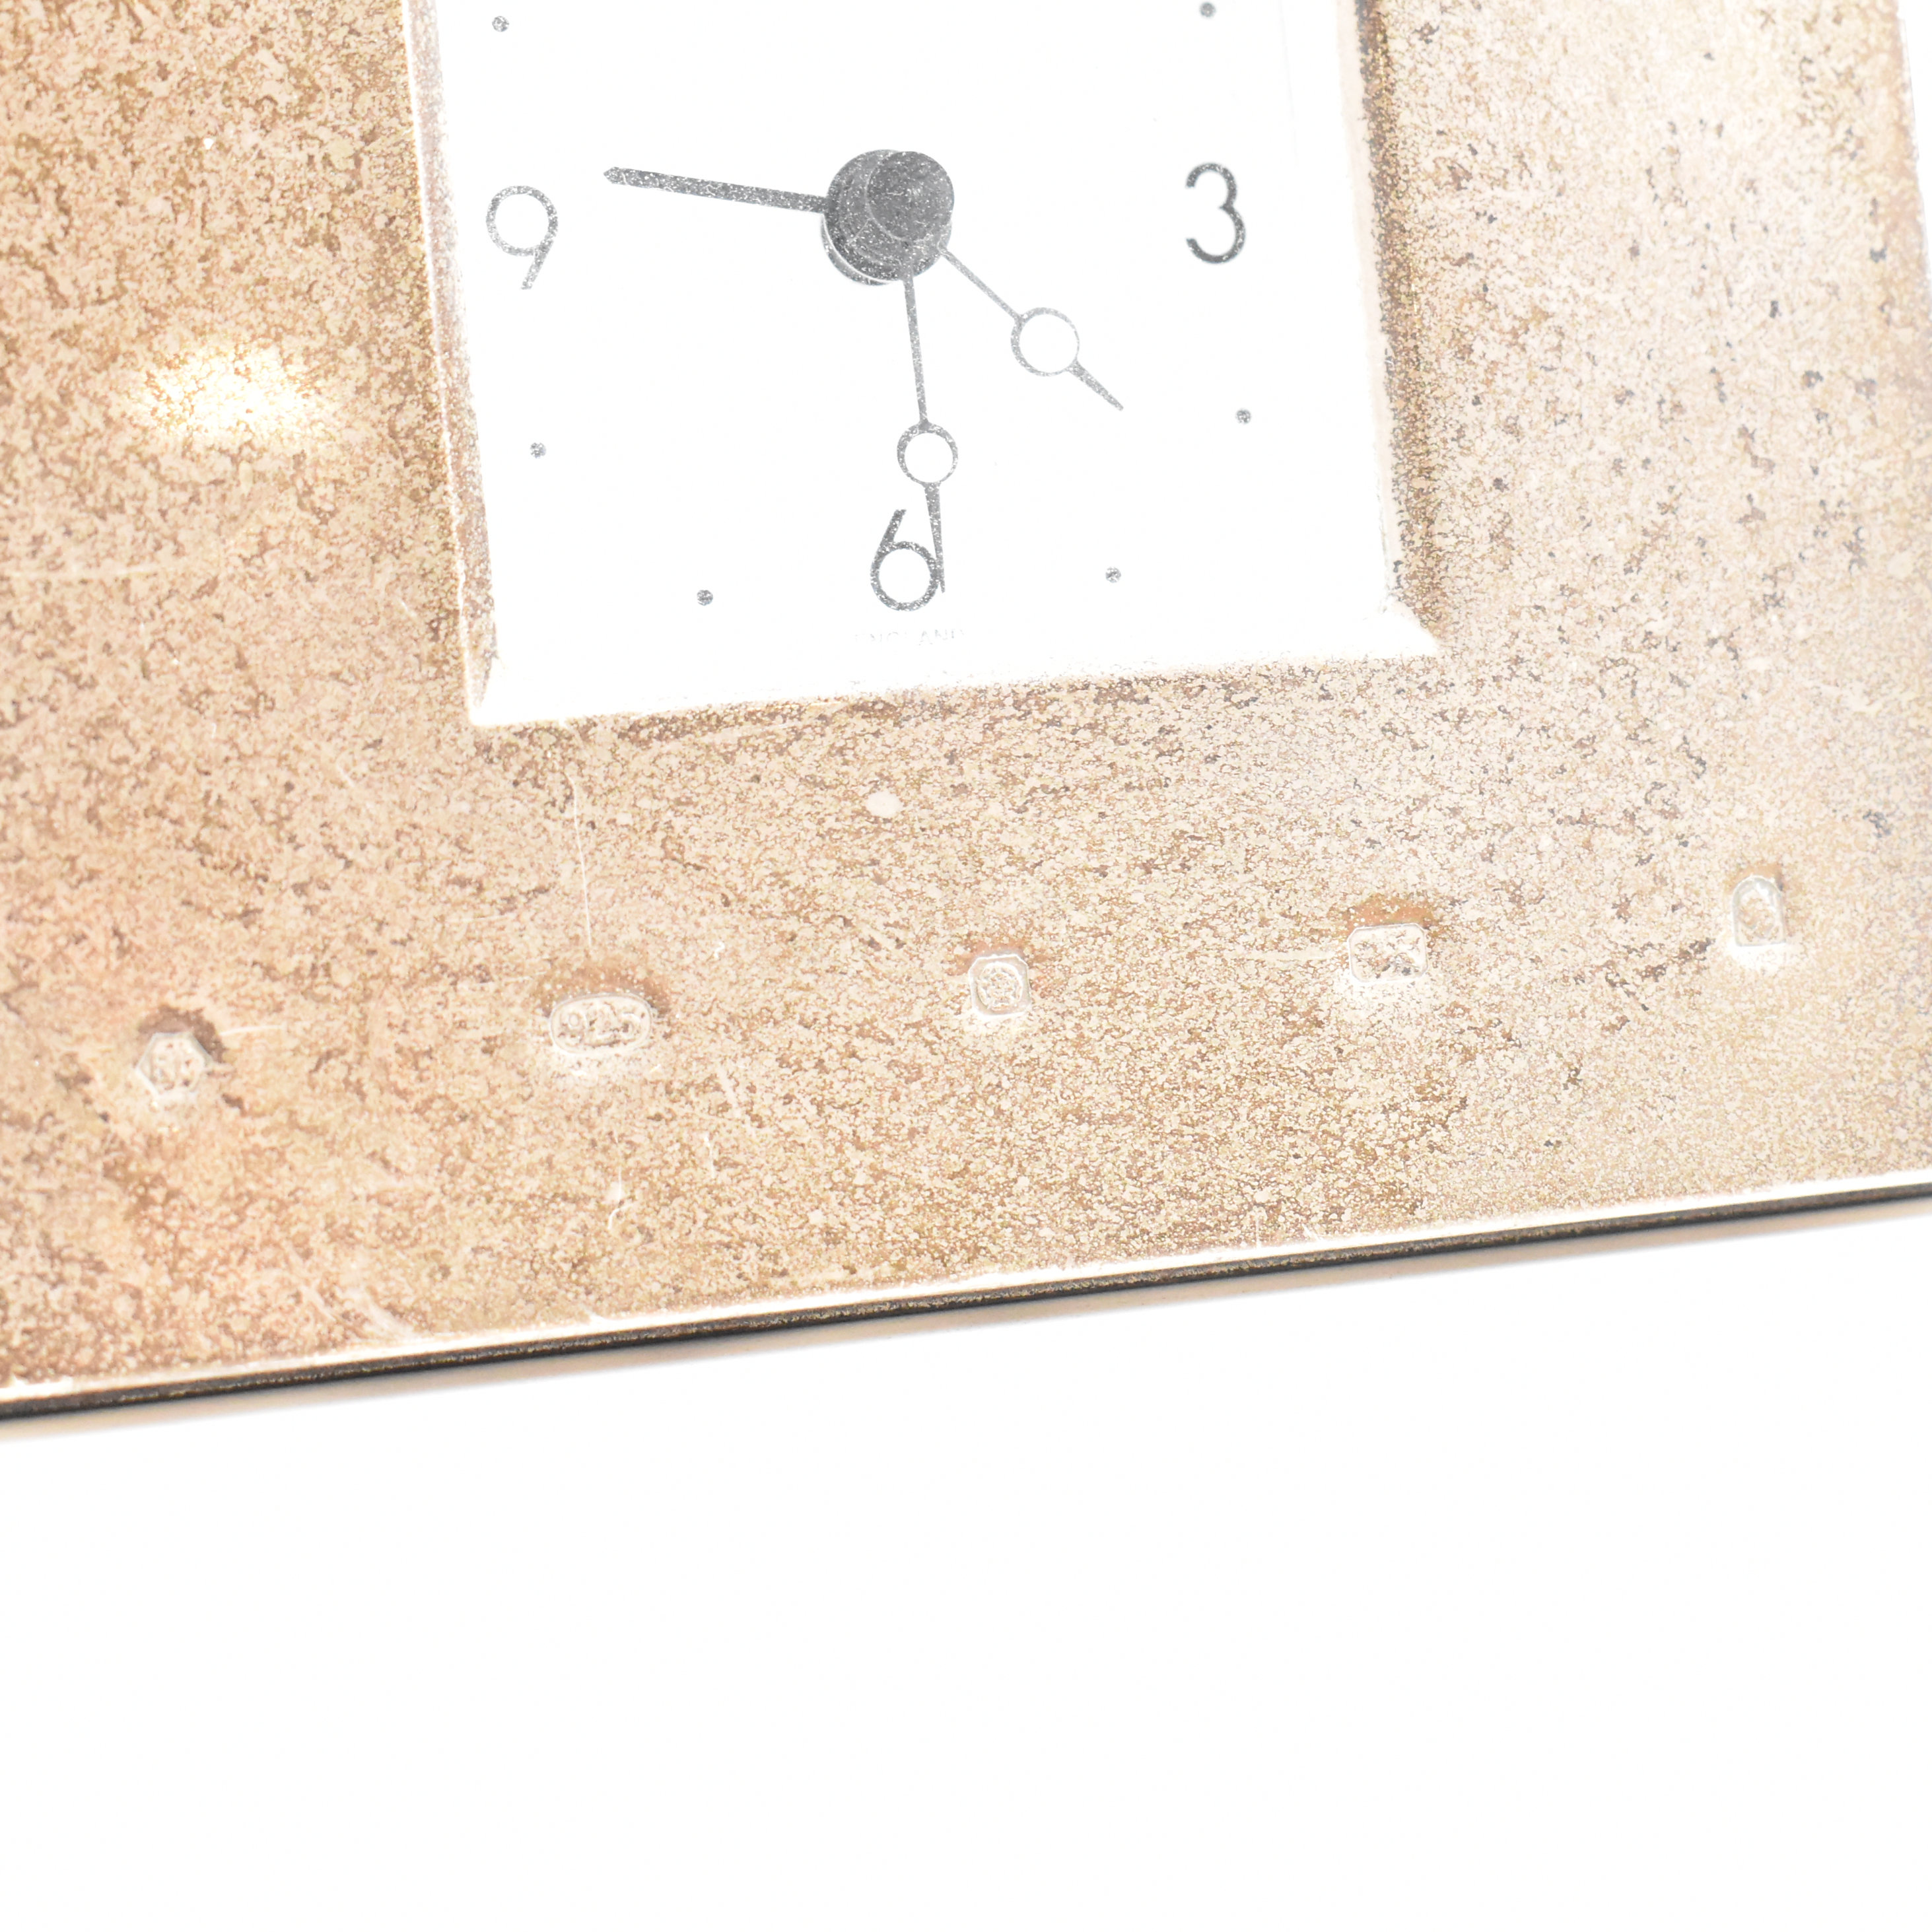 CONTEMPORARY HALLMARKED SILVER FRONTED DESK CLOCK - Image 3 of 4